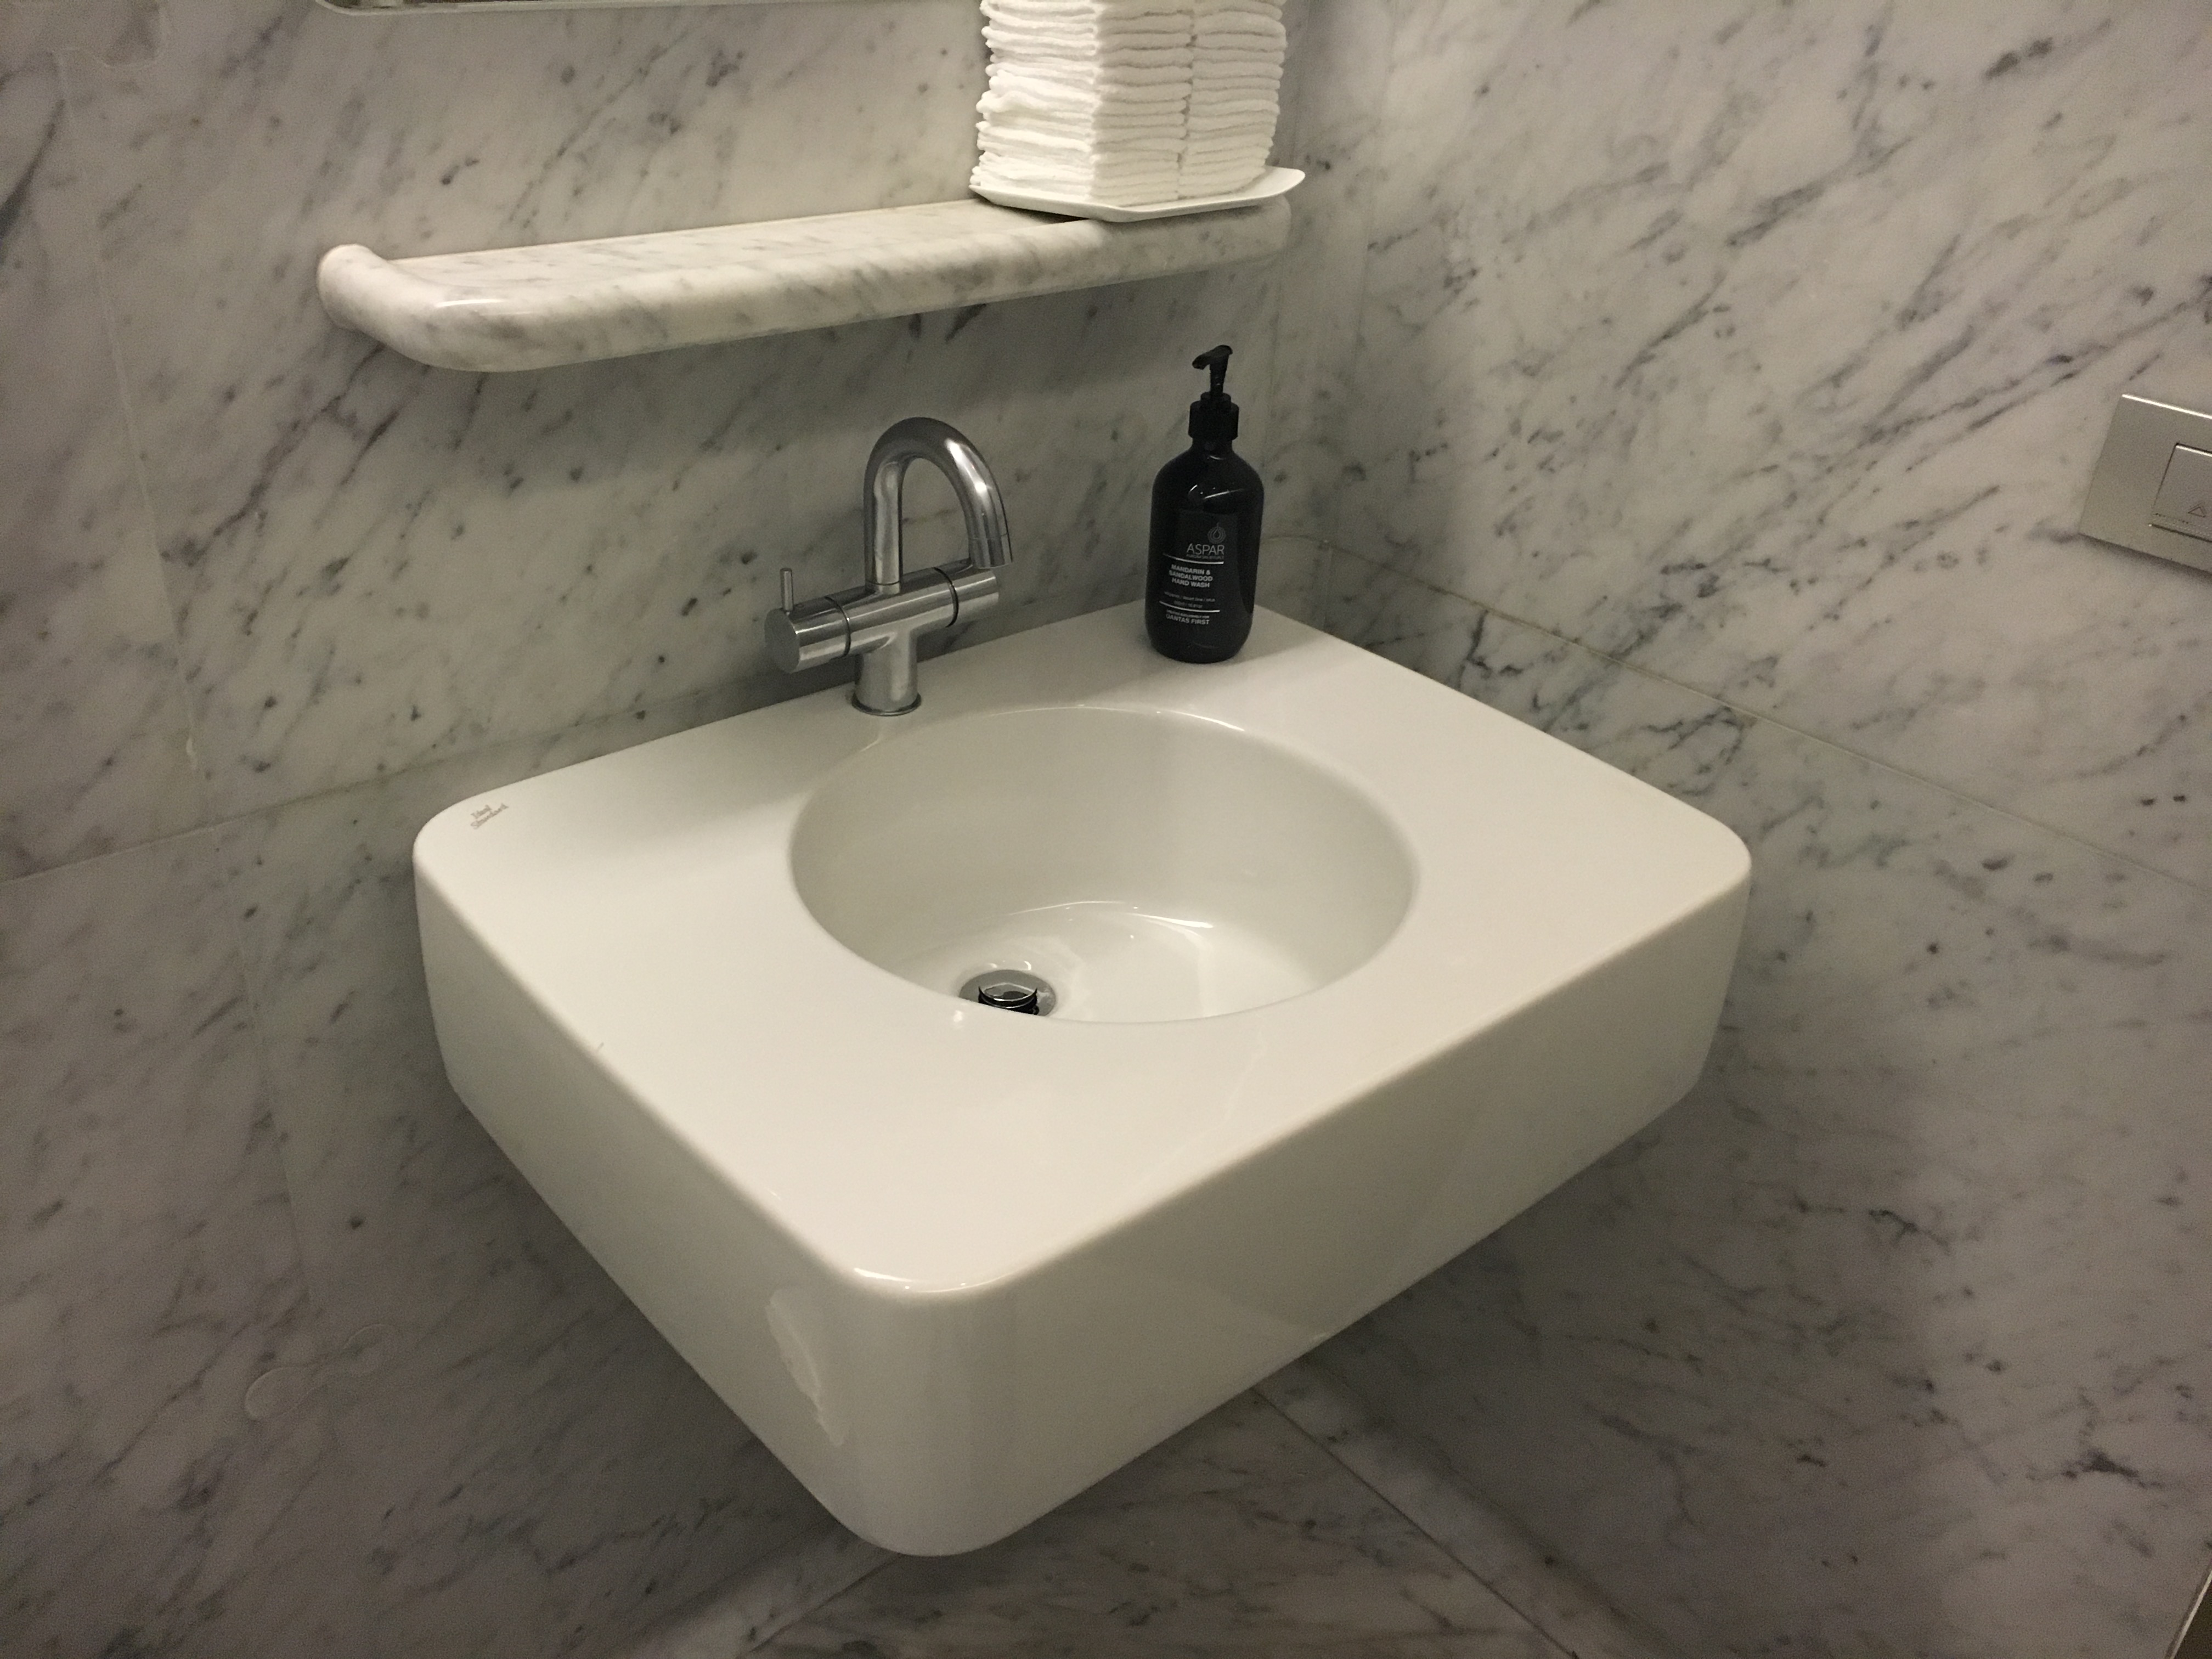 a sink with a soap dispenser and a shelf